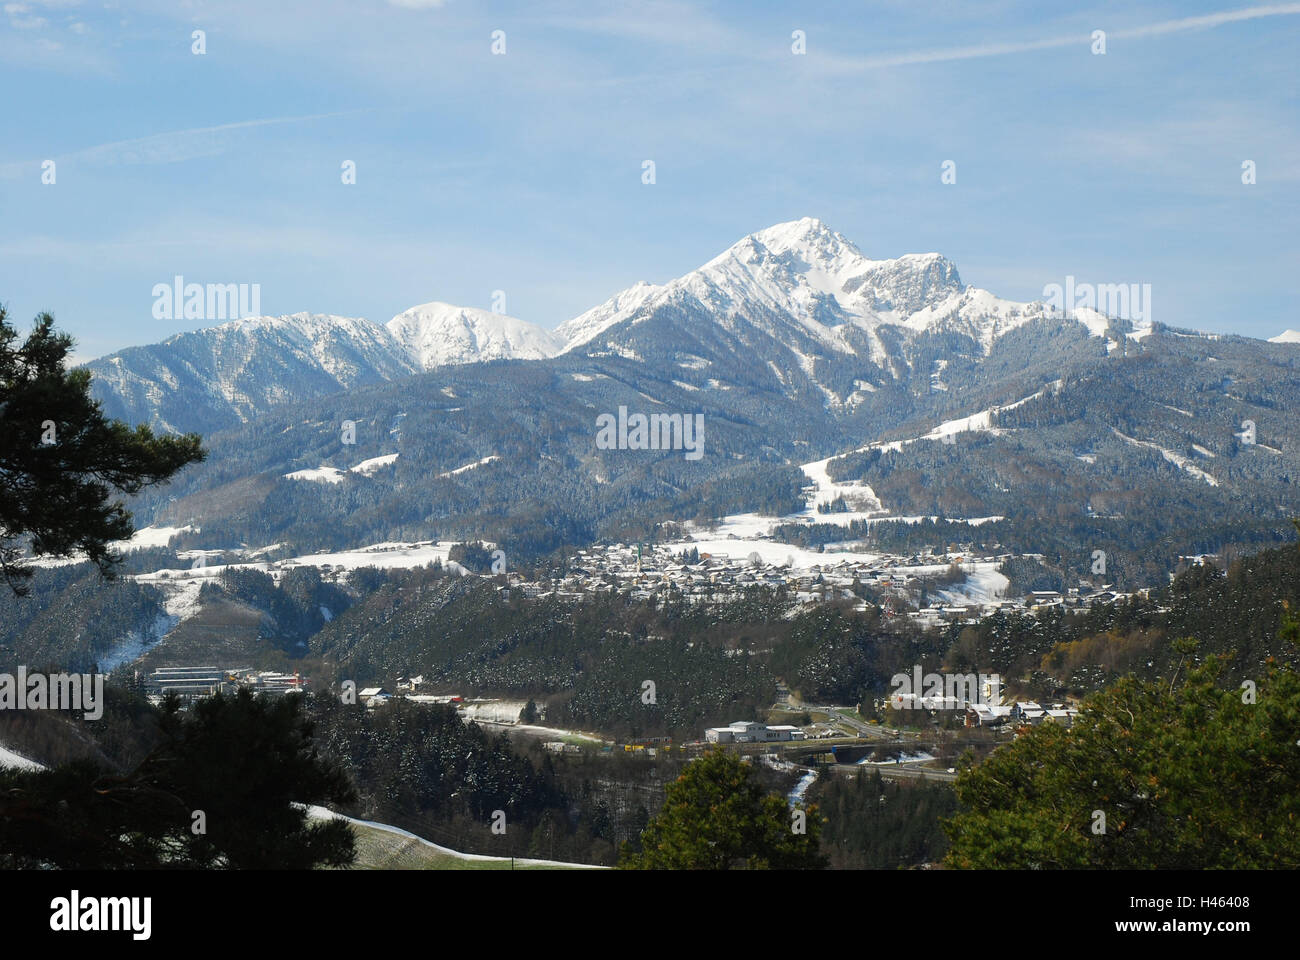 Austria, Tyrol, mountains, Nockspitze, Mutters, local view, scenery, mountains, skiing area, snow, snow leftovers, winters, view, scenery, place, Saile, Stock Photo